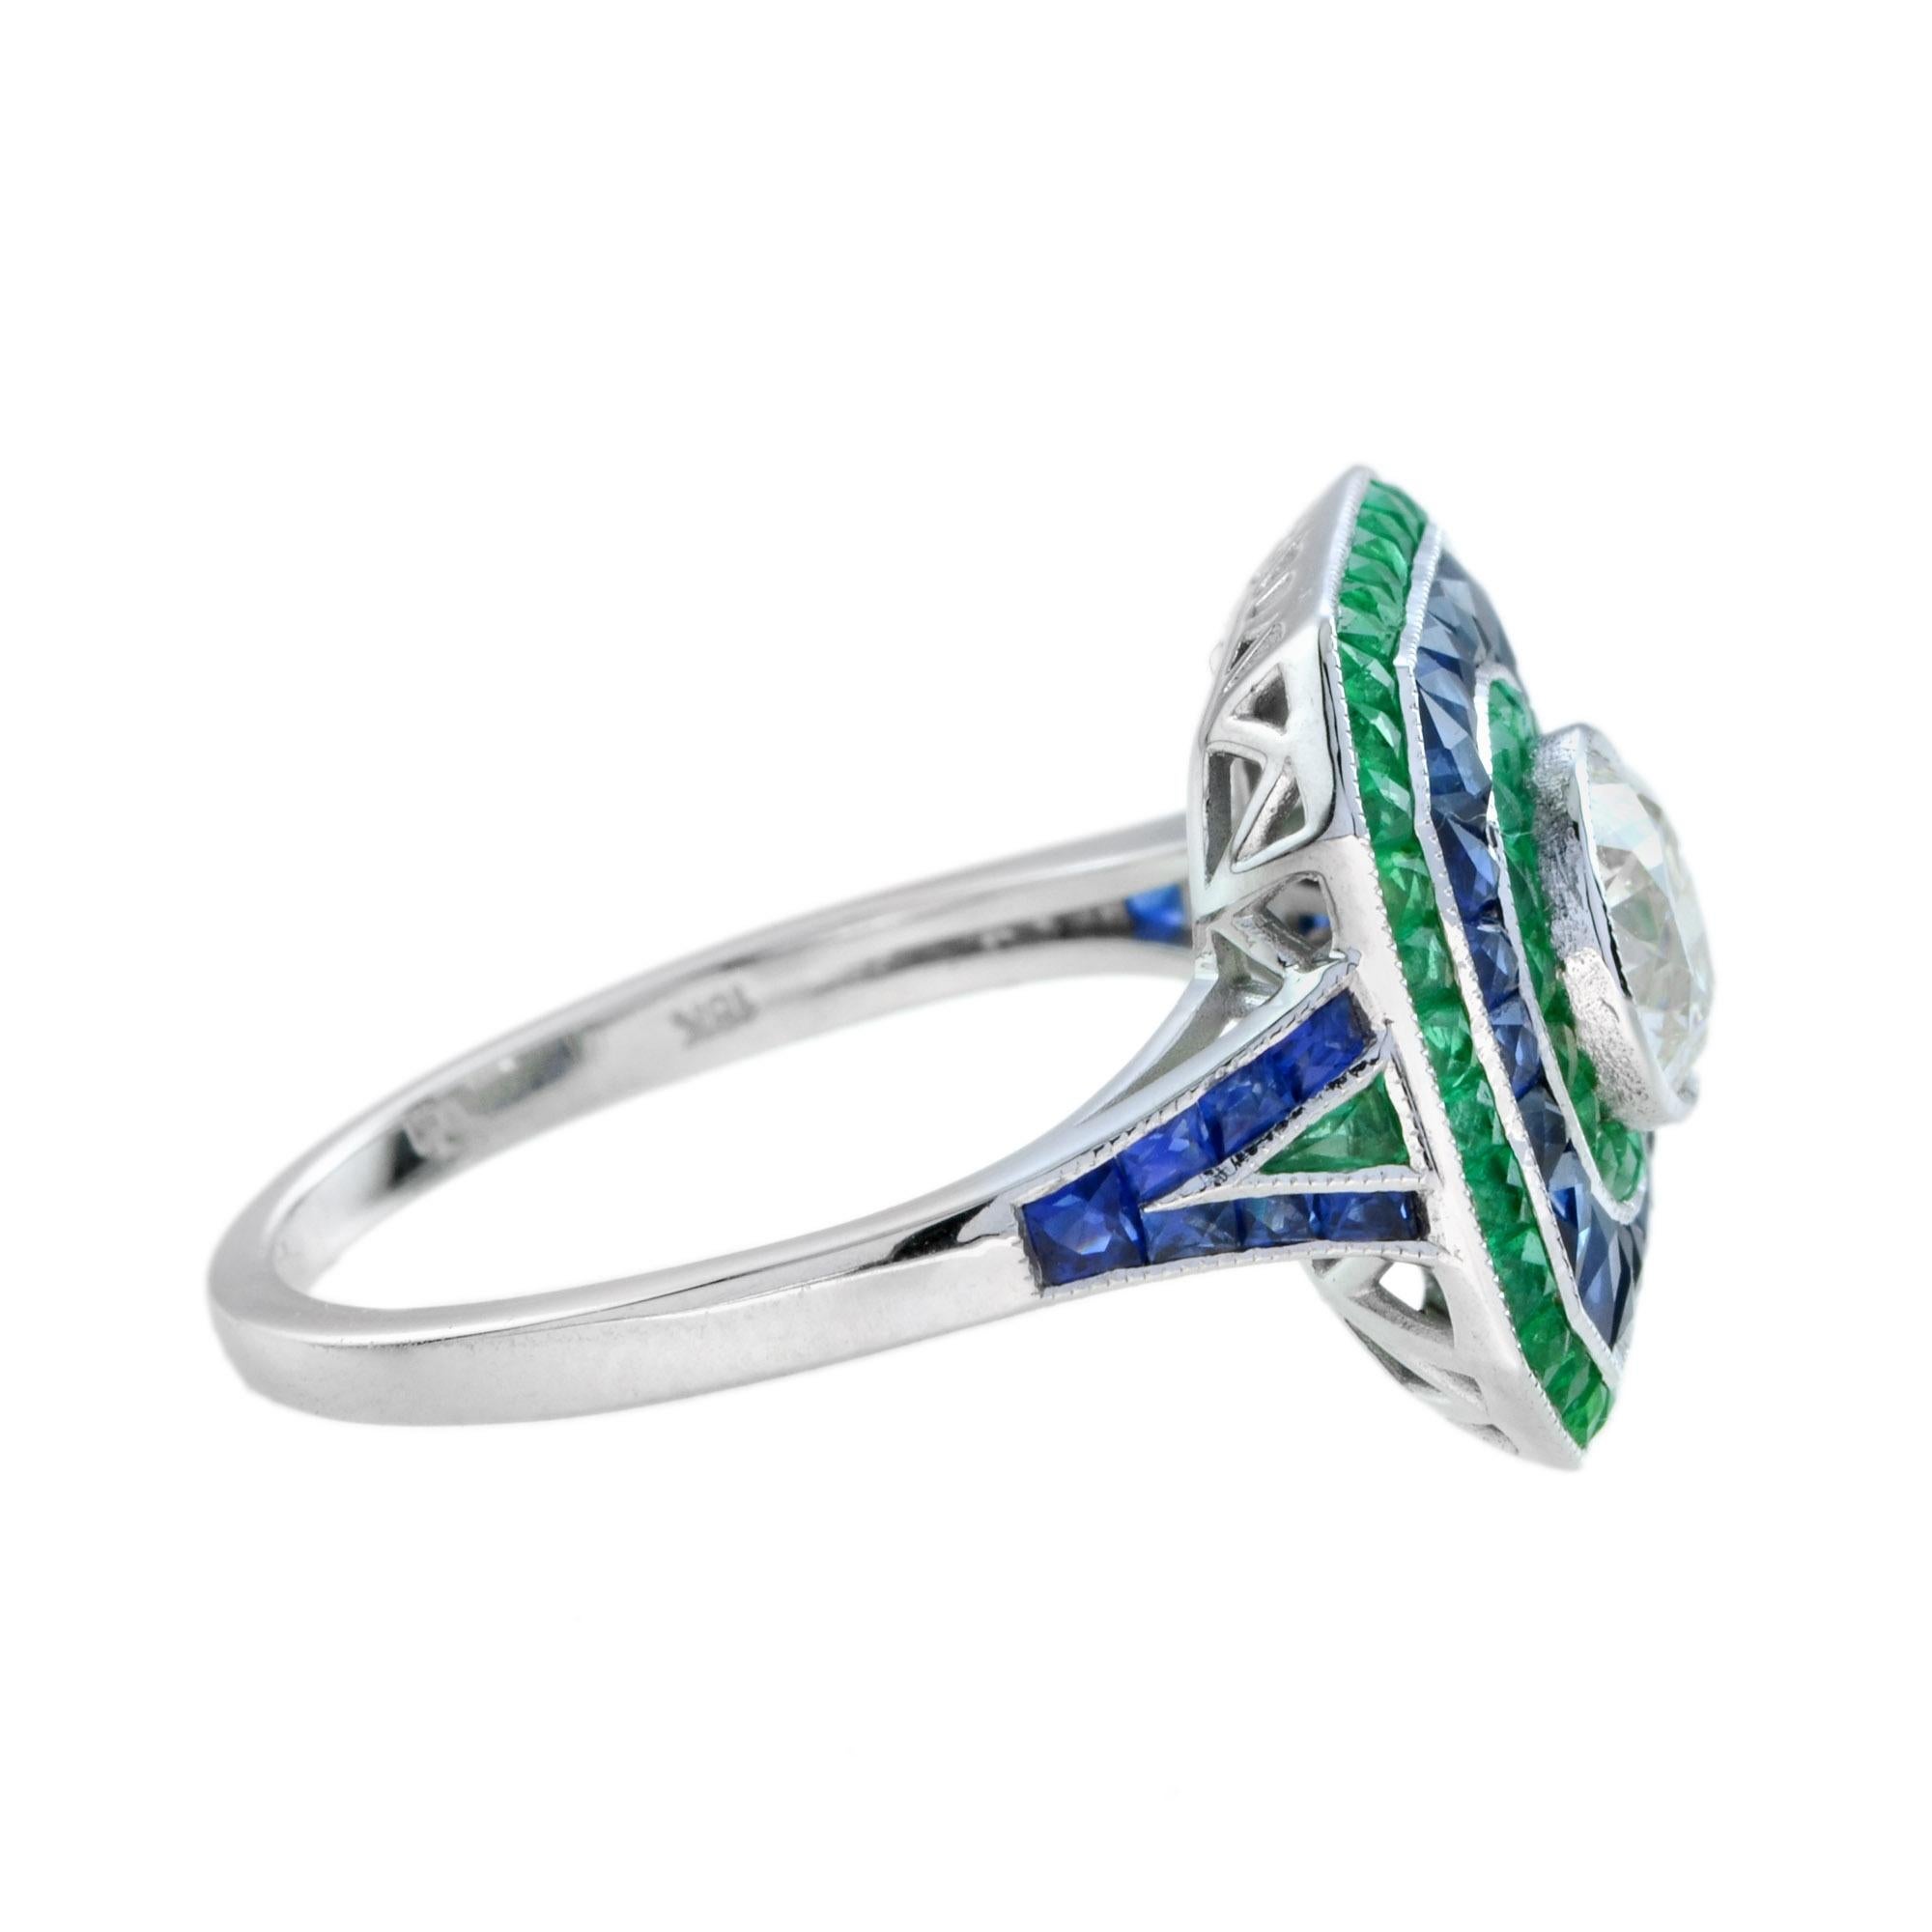 Art Deco GIA Certified Old Cut Diamond with Sapphire Emerald Engagement Ring in 18k Gold